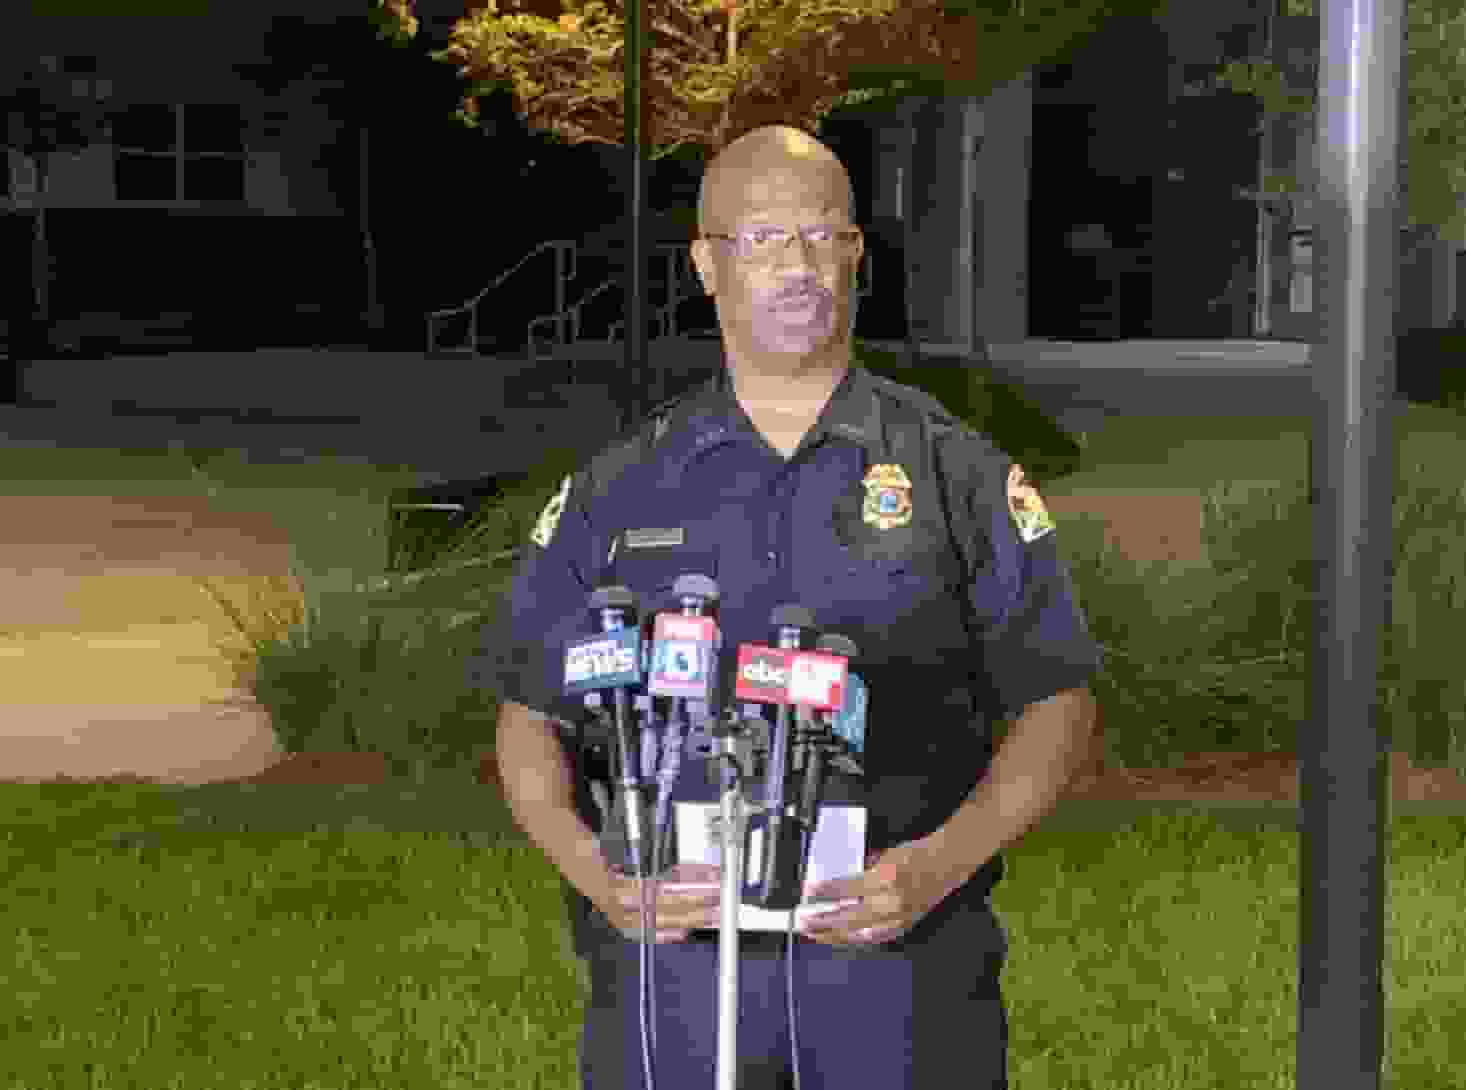 St. Petersburg Police Chief Anthony Holloway